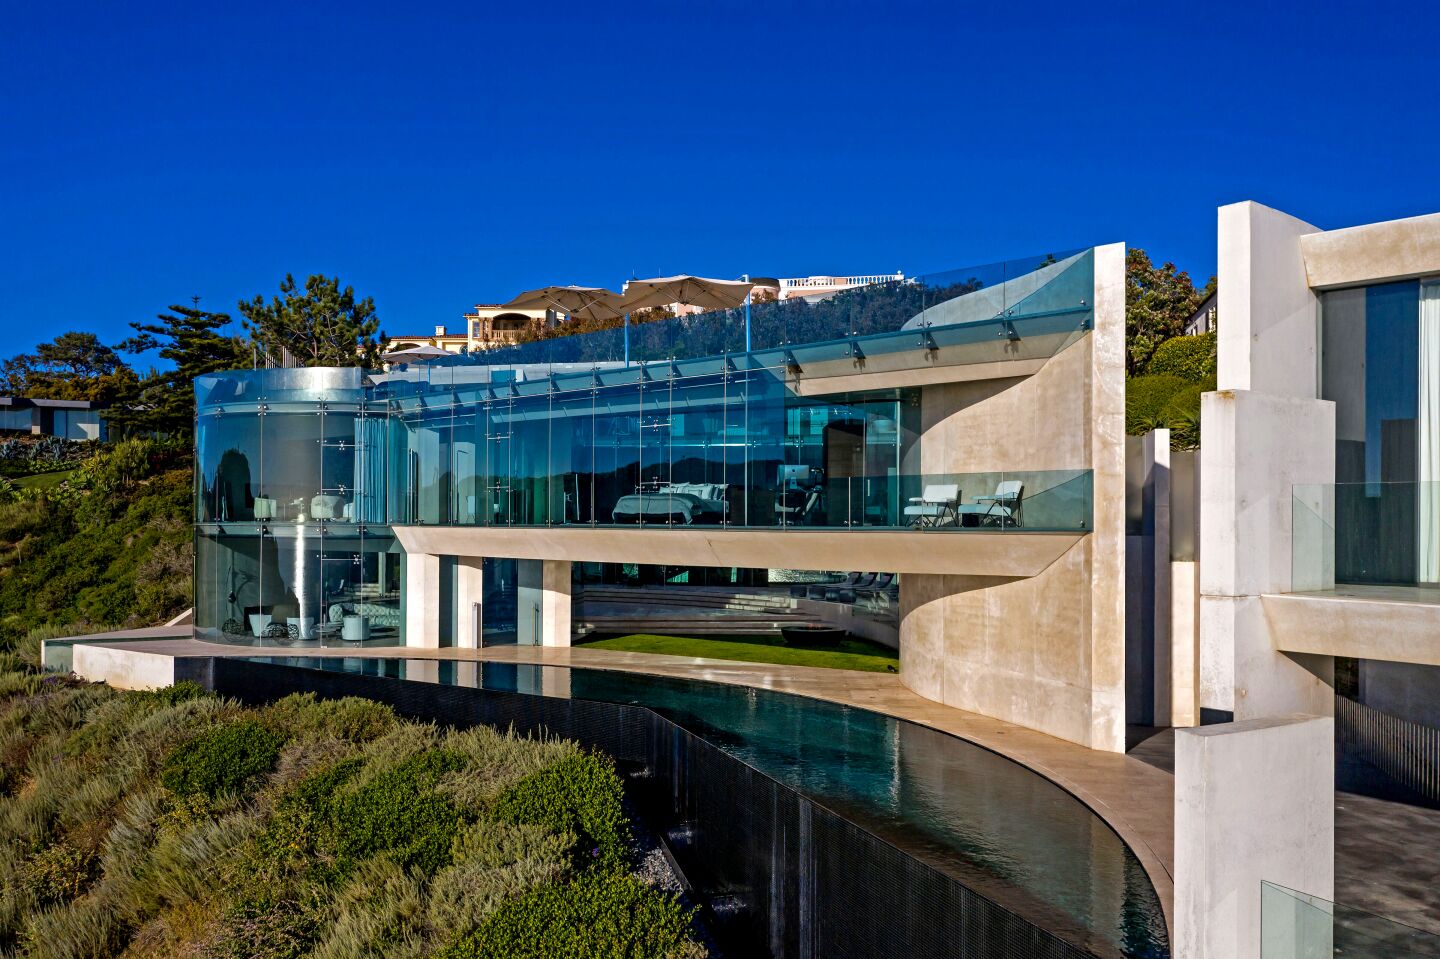 The Razor House, an architectural masterpiece, is located on the La Jolla coast.